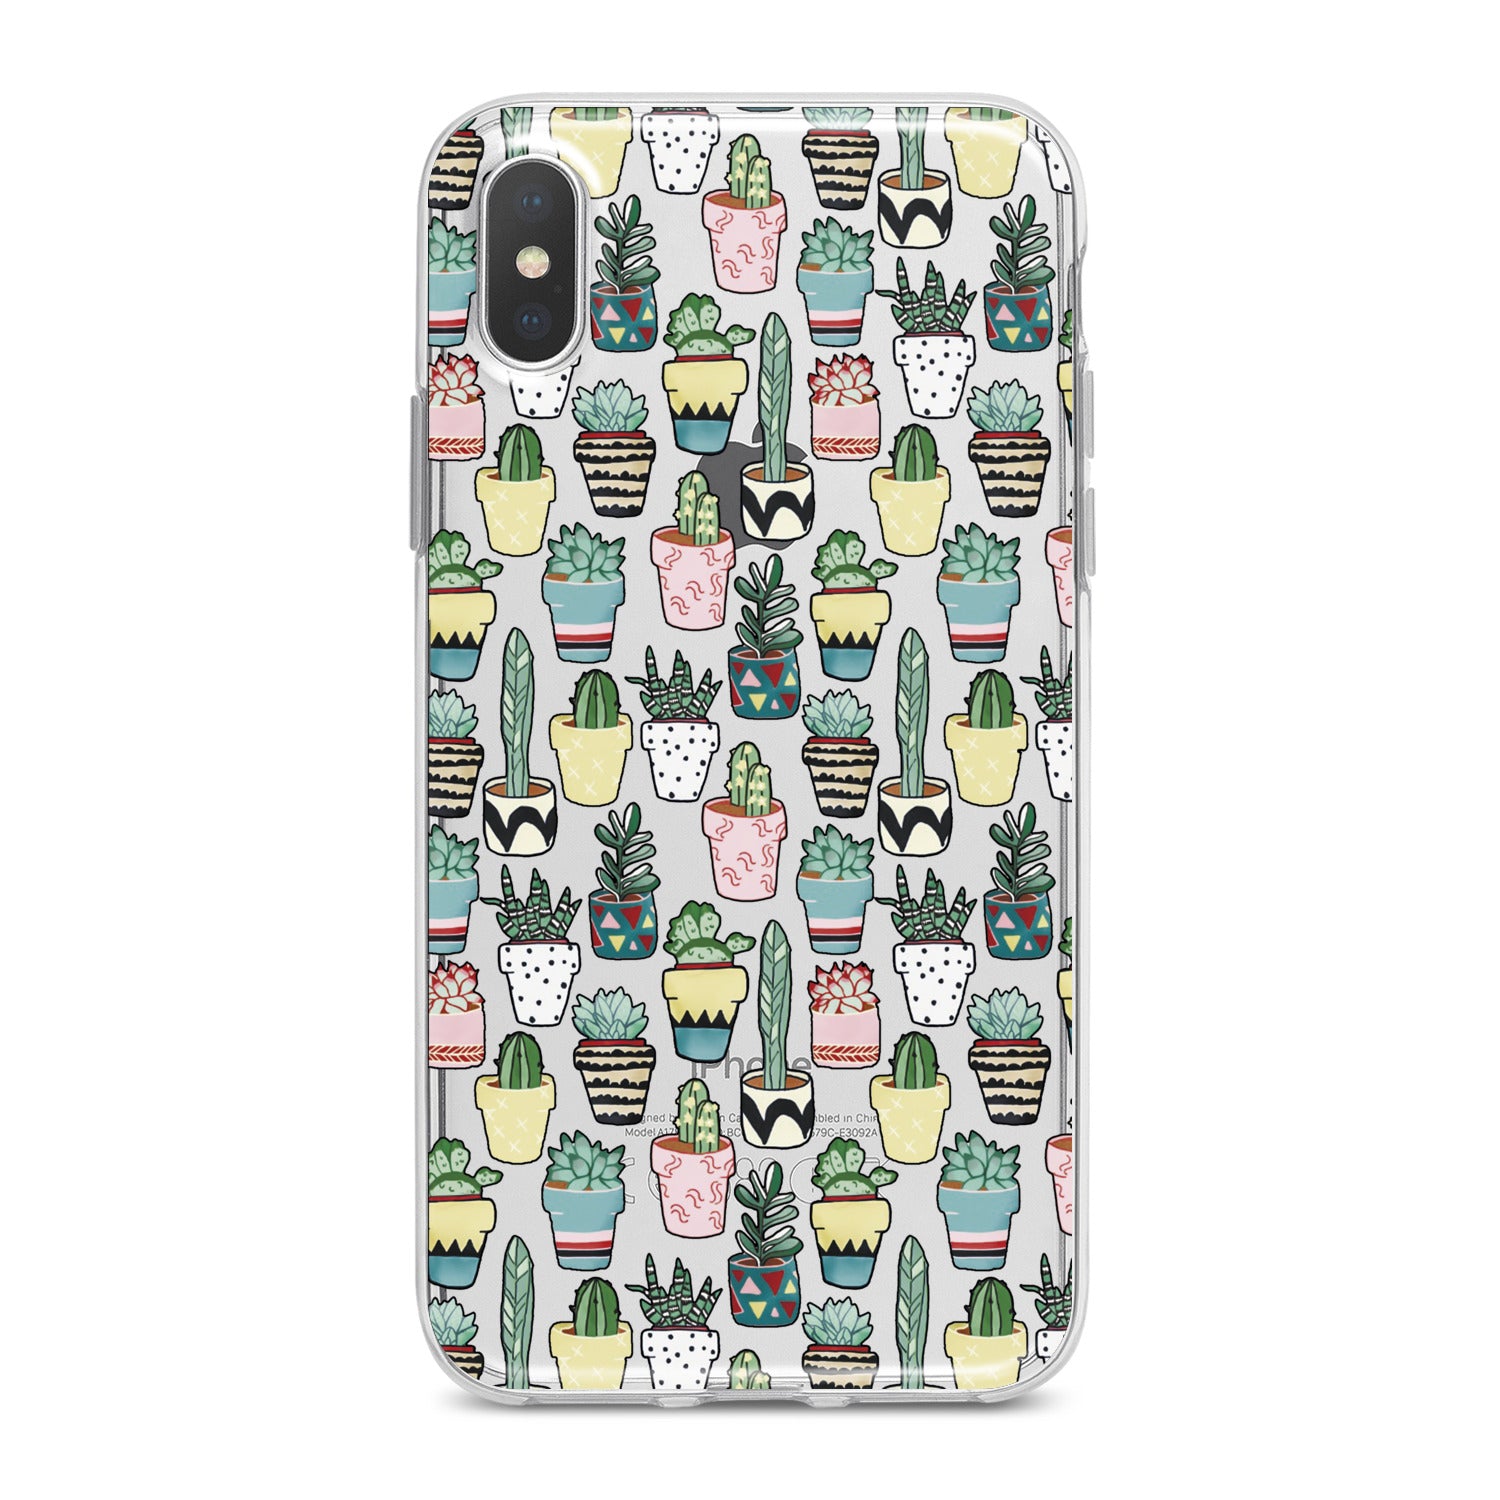 Lex Altern Cute Cactus Phone Case for your iPhone & Android phone.